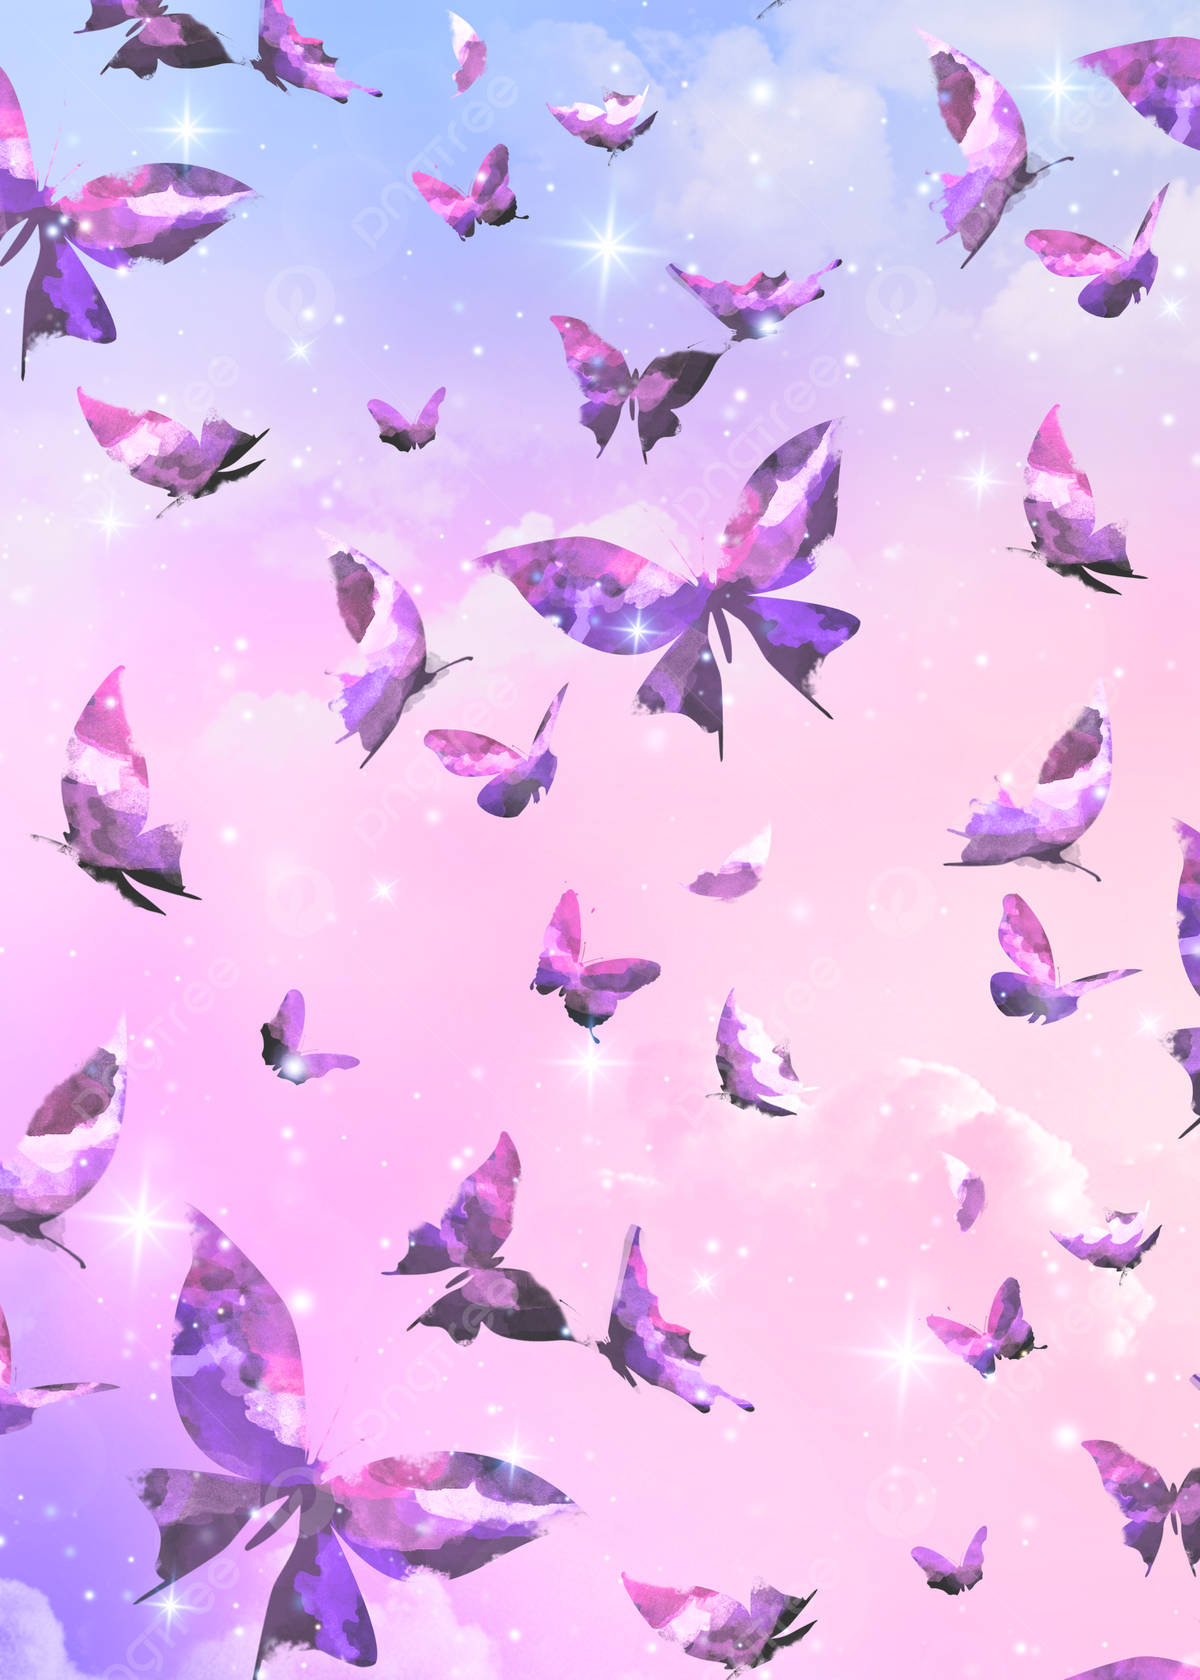 [100+] Pastel Butterfly Wallpapers | Wallpapers.com